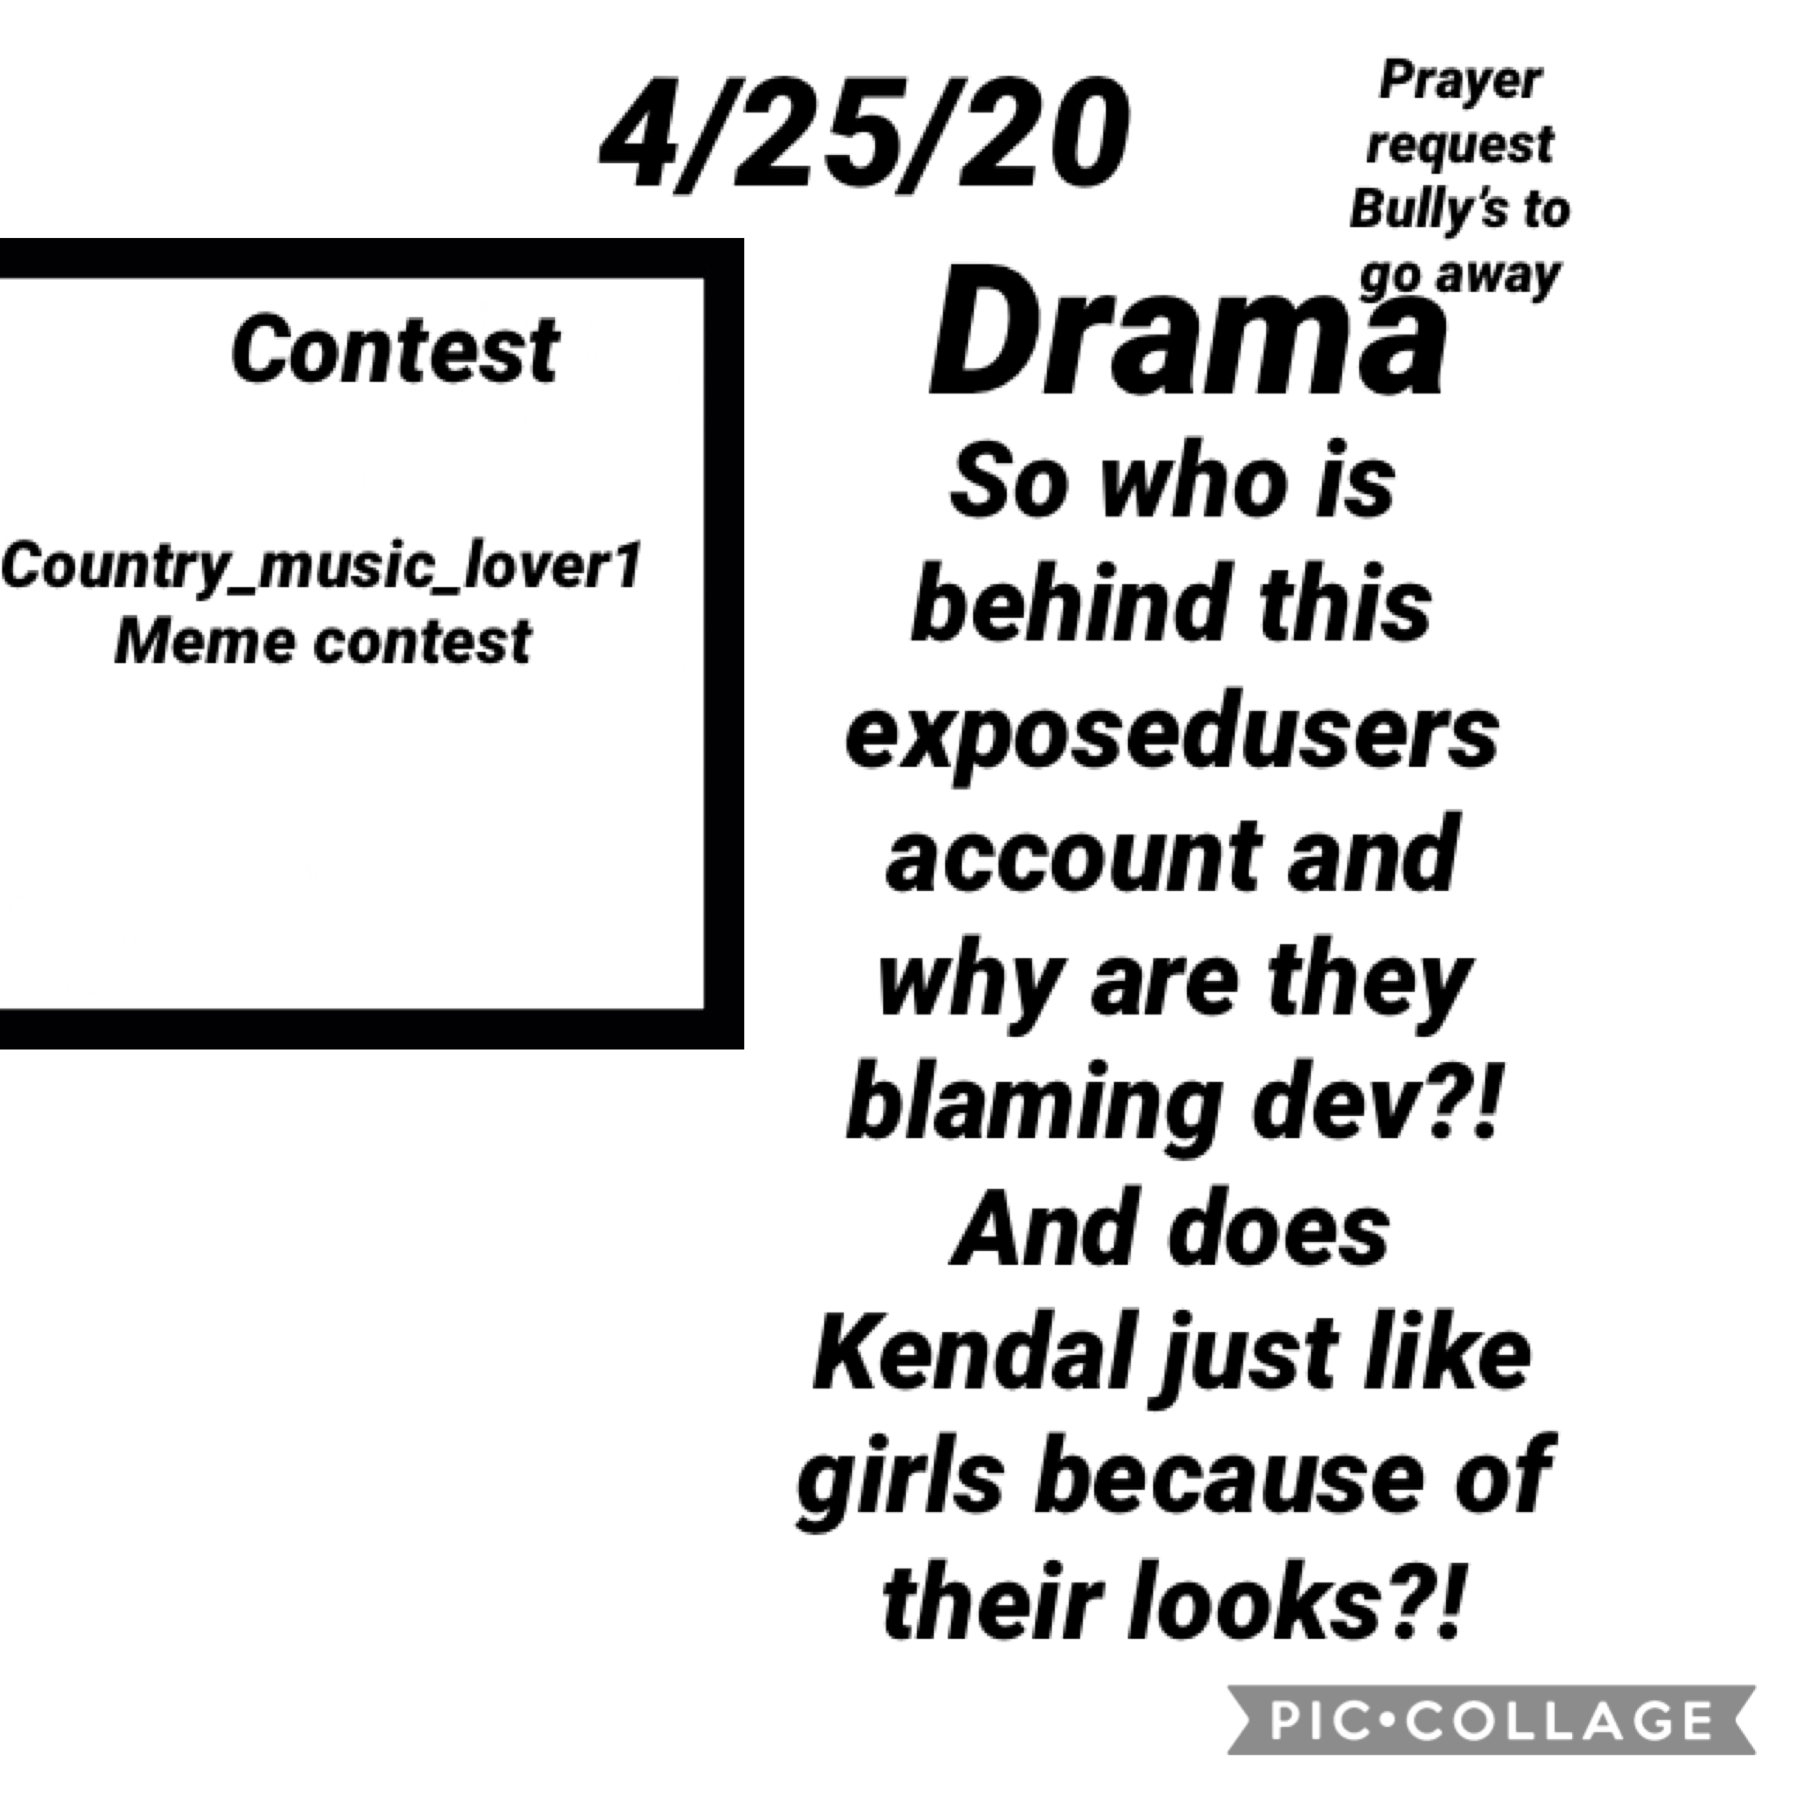 ☕️ tAp ☕️ 
Please let me know if you have any contest or prayer request and users they have drama I can add more how did I do?